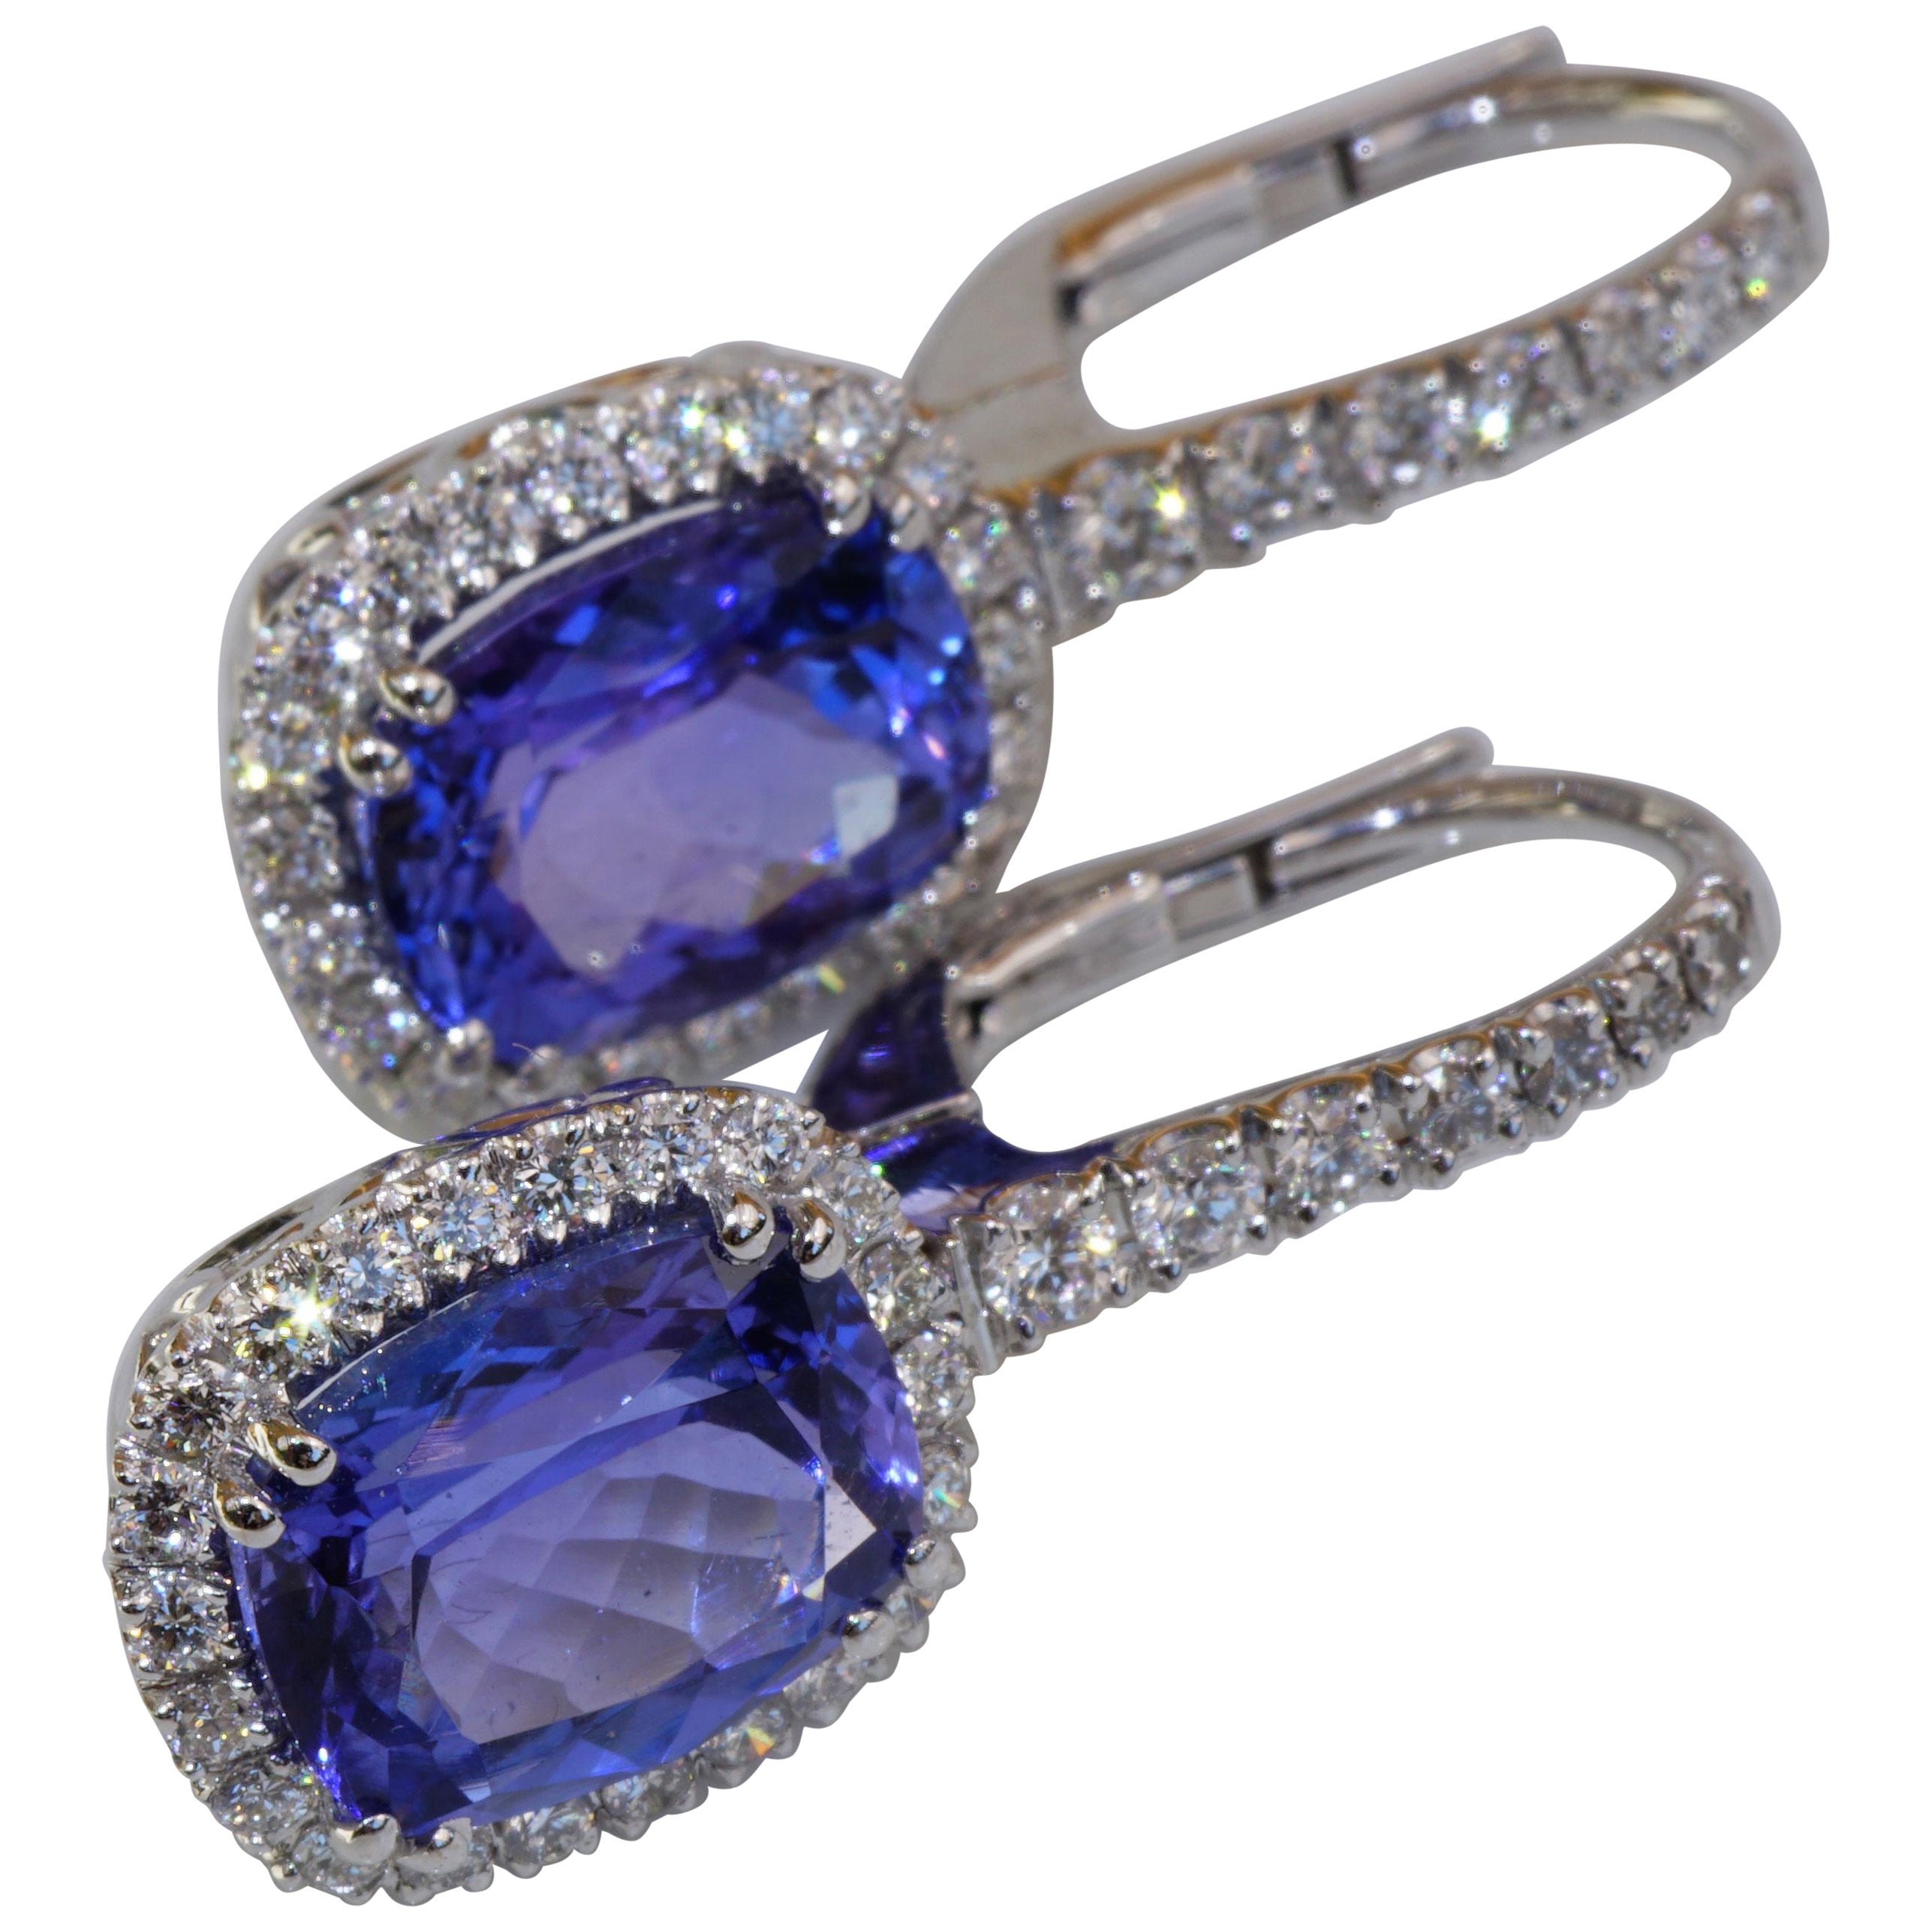 The classic among the dream earrings, the tanzanite in the incredible color of the blue lily, a sapphire blue with a touch of amethyst, the tanzanite is 1000 times rarer than the diamond in the world and one of the most expensive gemstones, 2